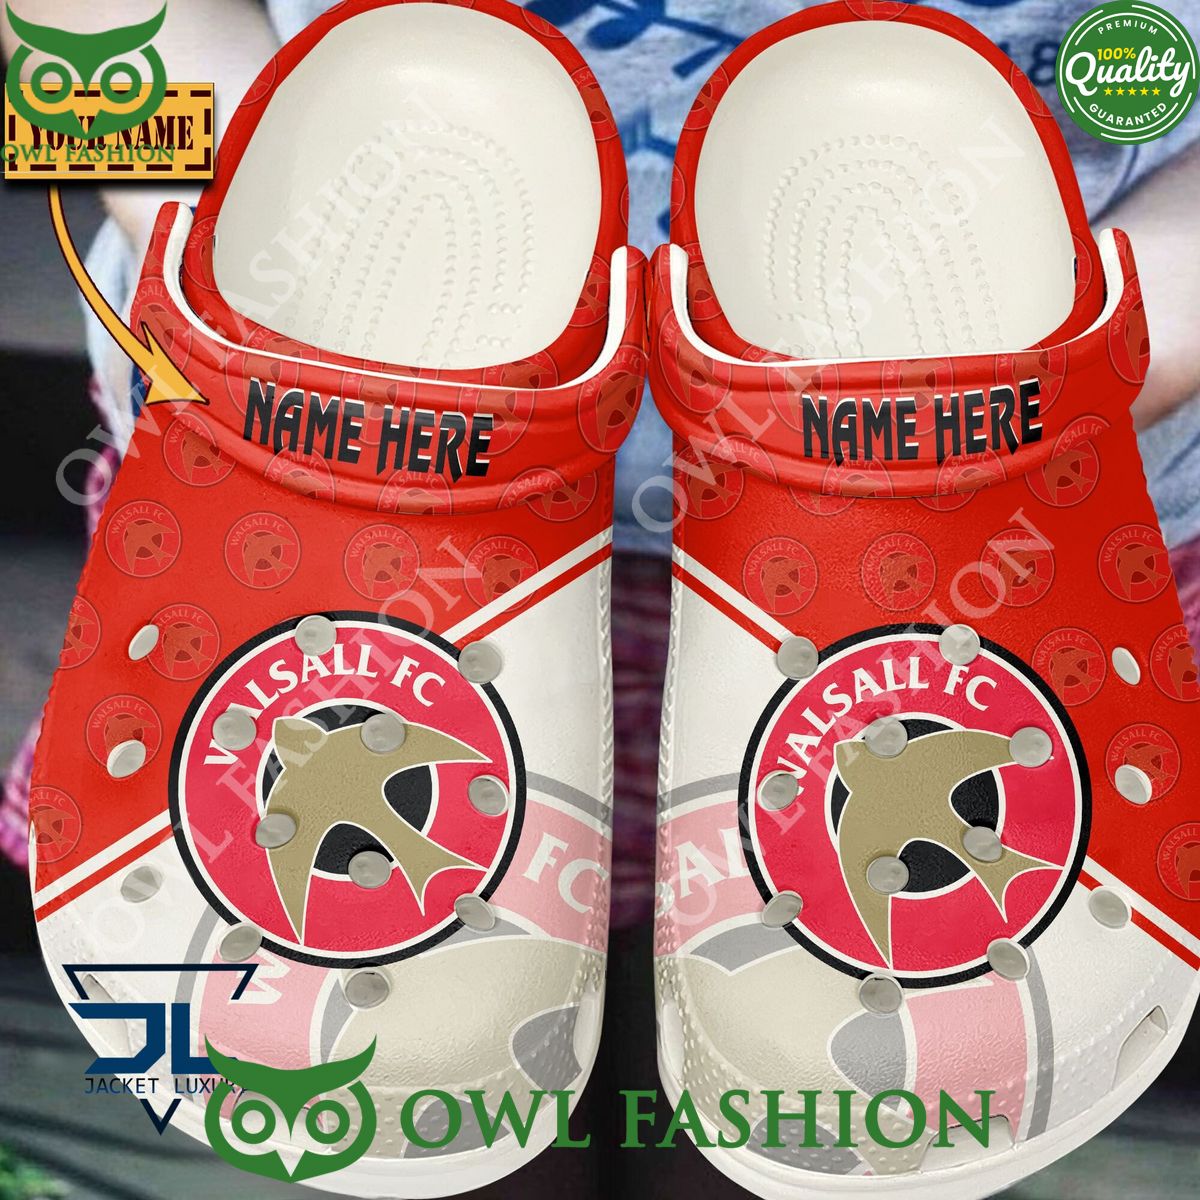 Walsall FC EFL Champion Personalized Crocs Rejuvenating picture